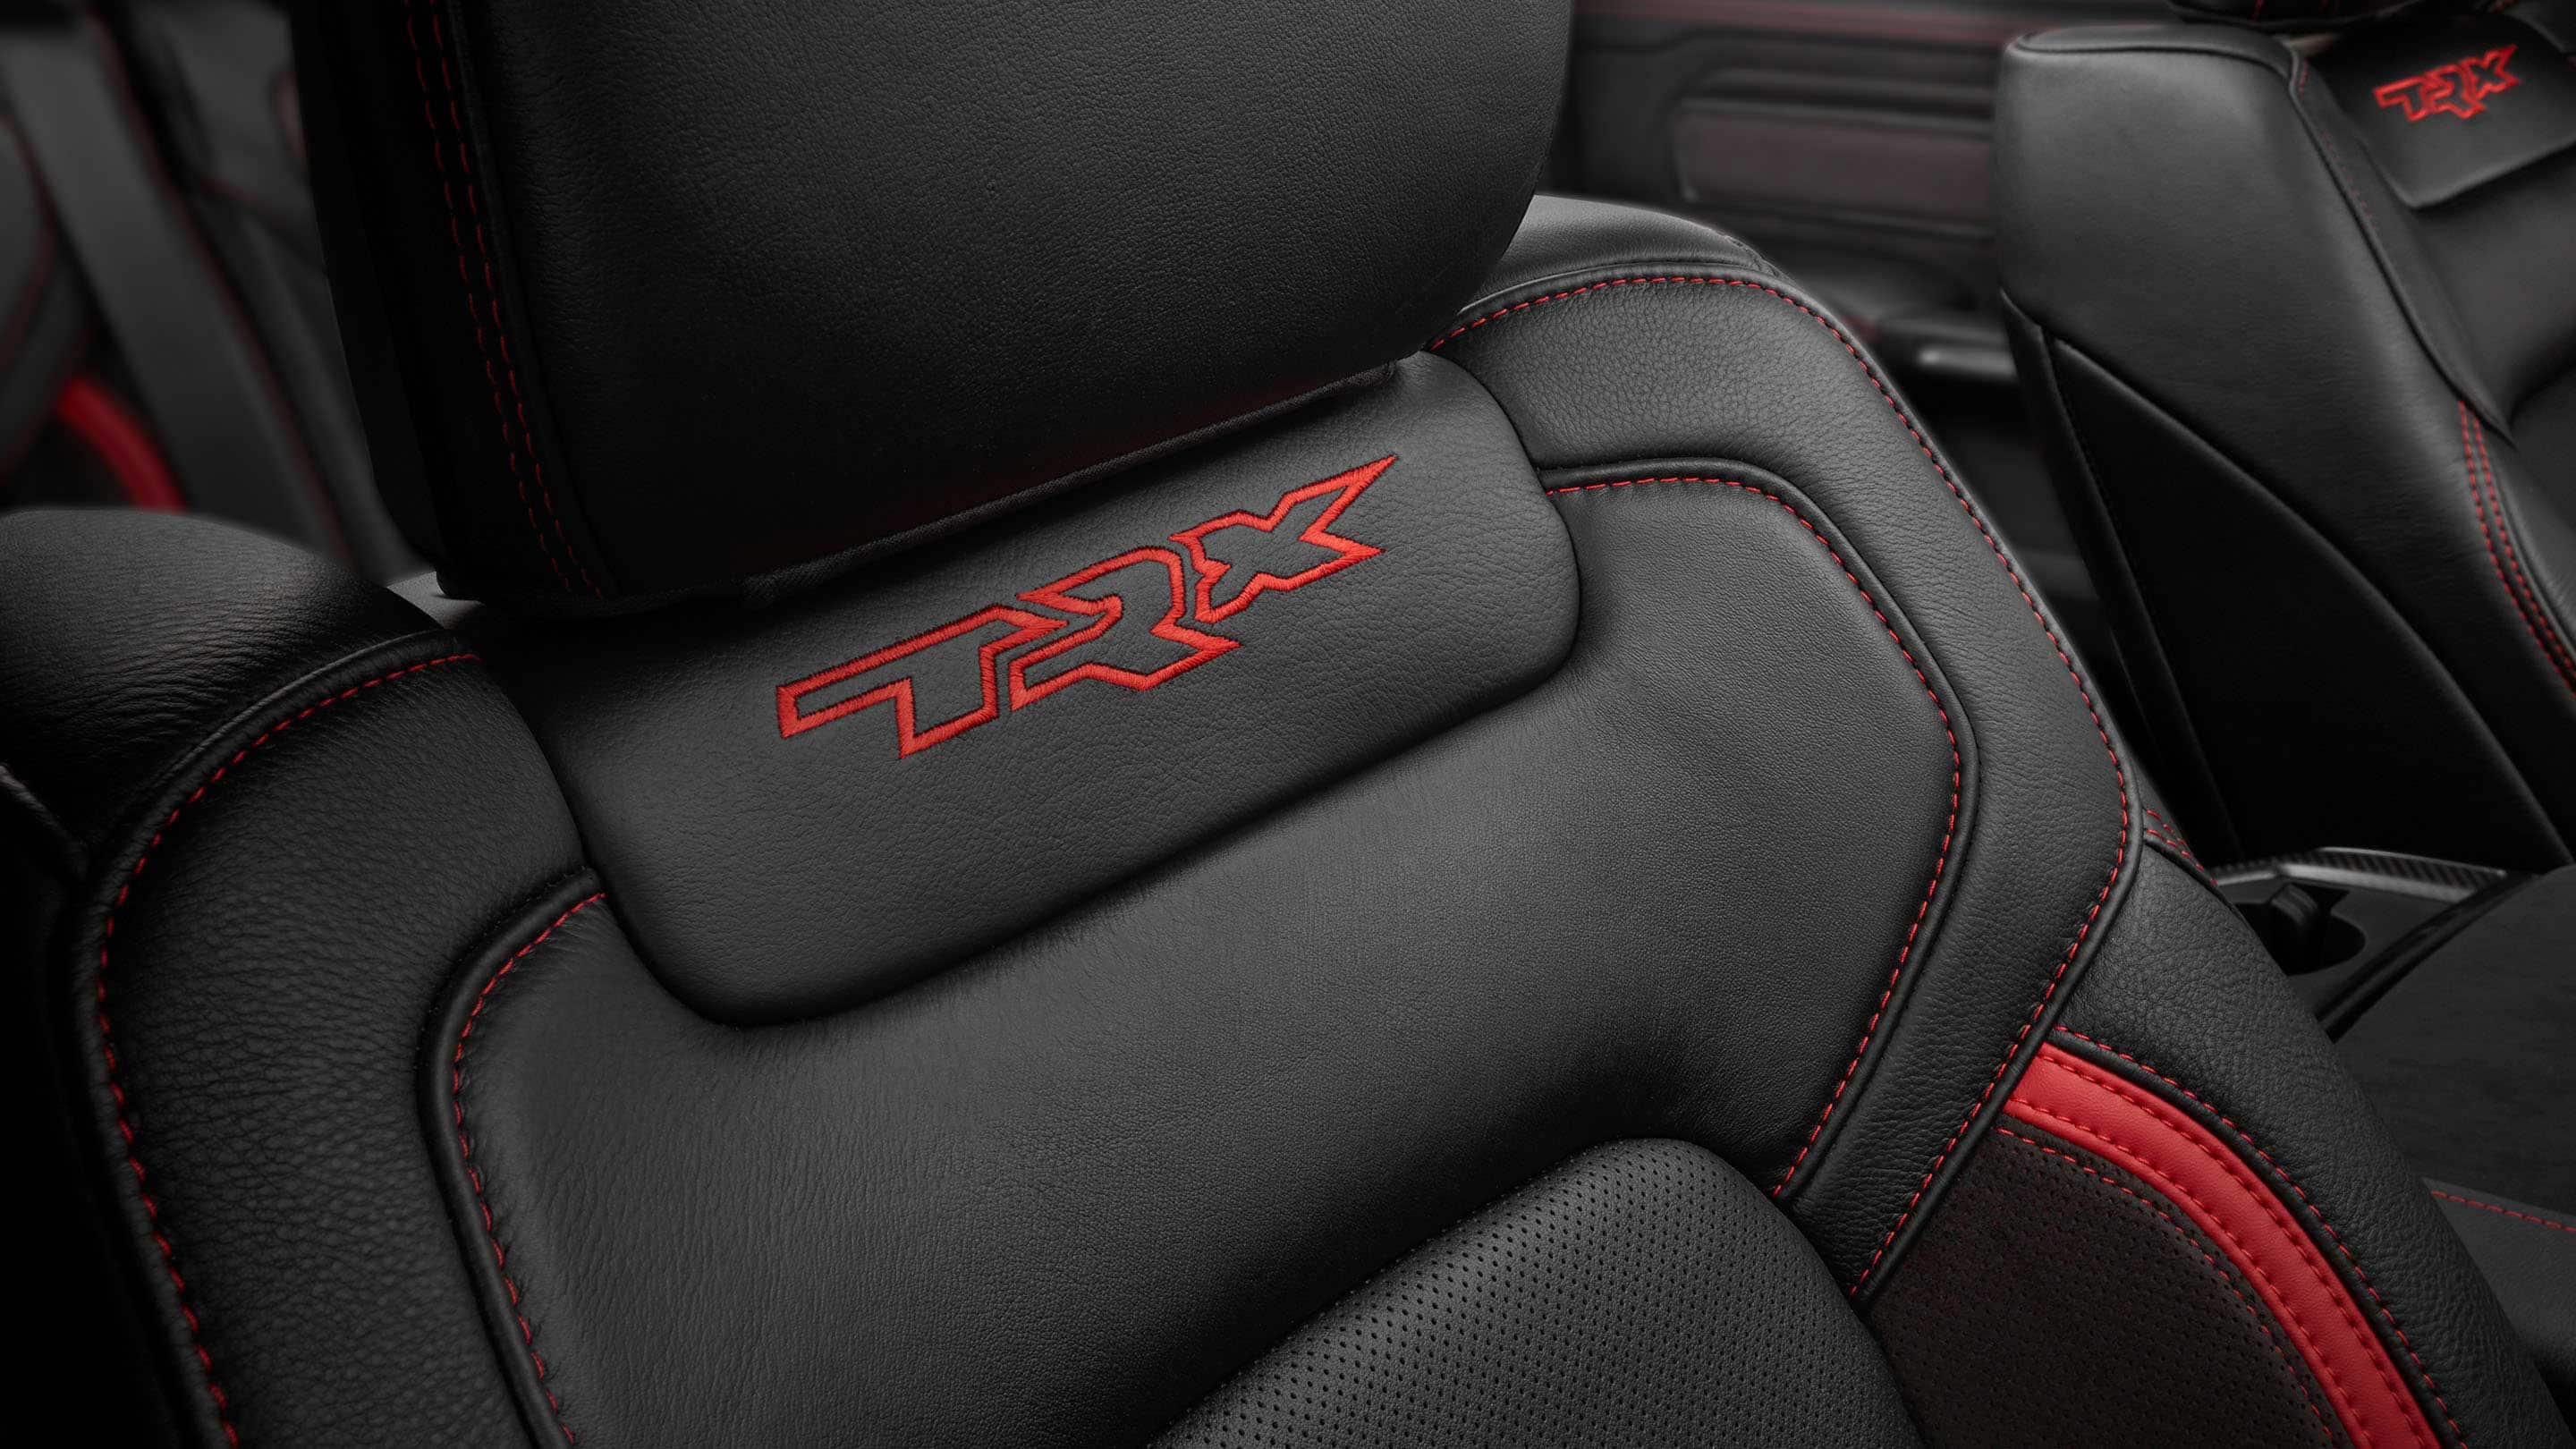 A close-up shot of the embroidered TRX logo on the front passenger seatback in the 2021 Ram 1500 TRX.